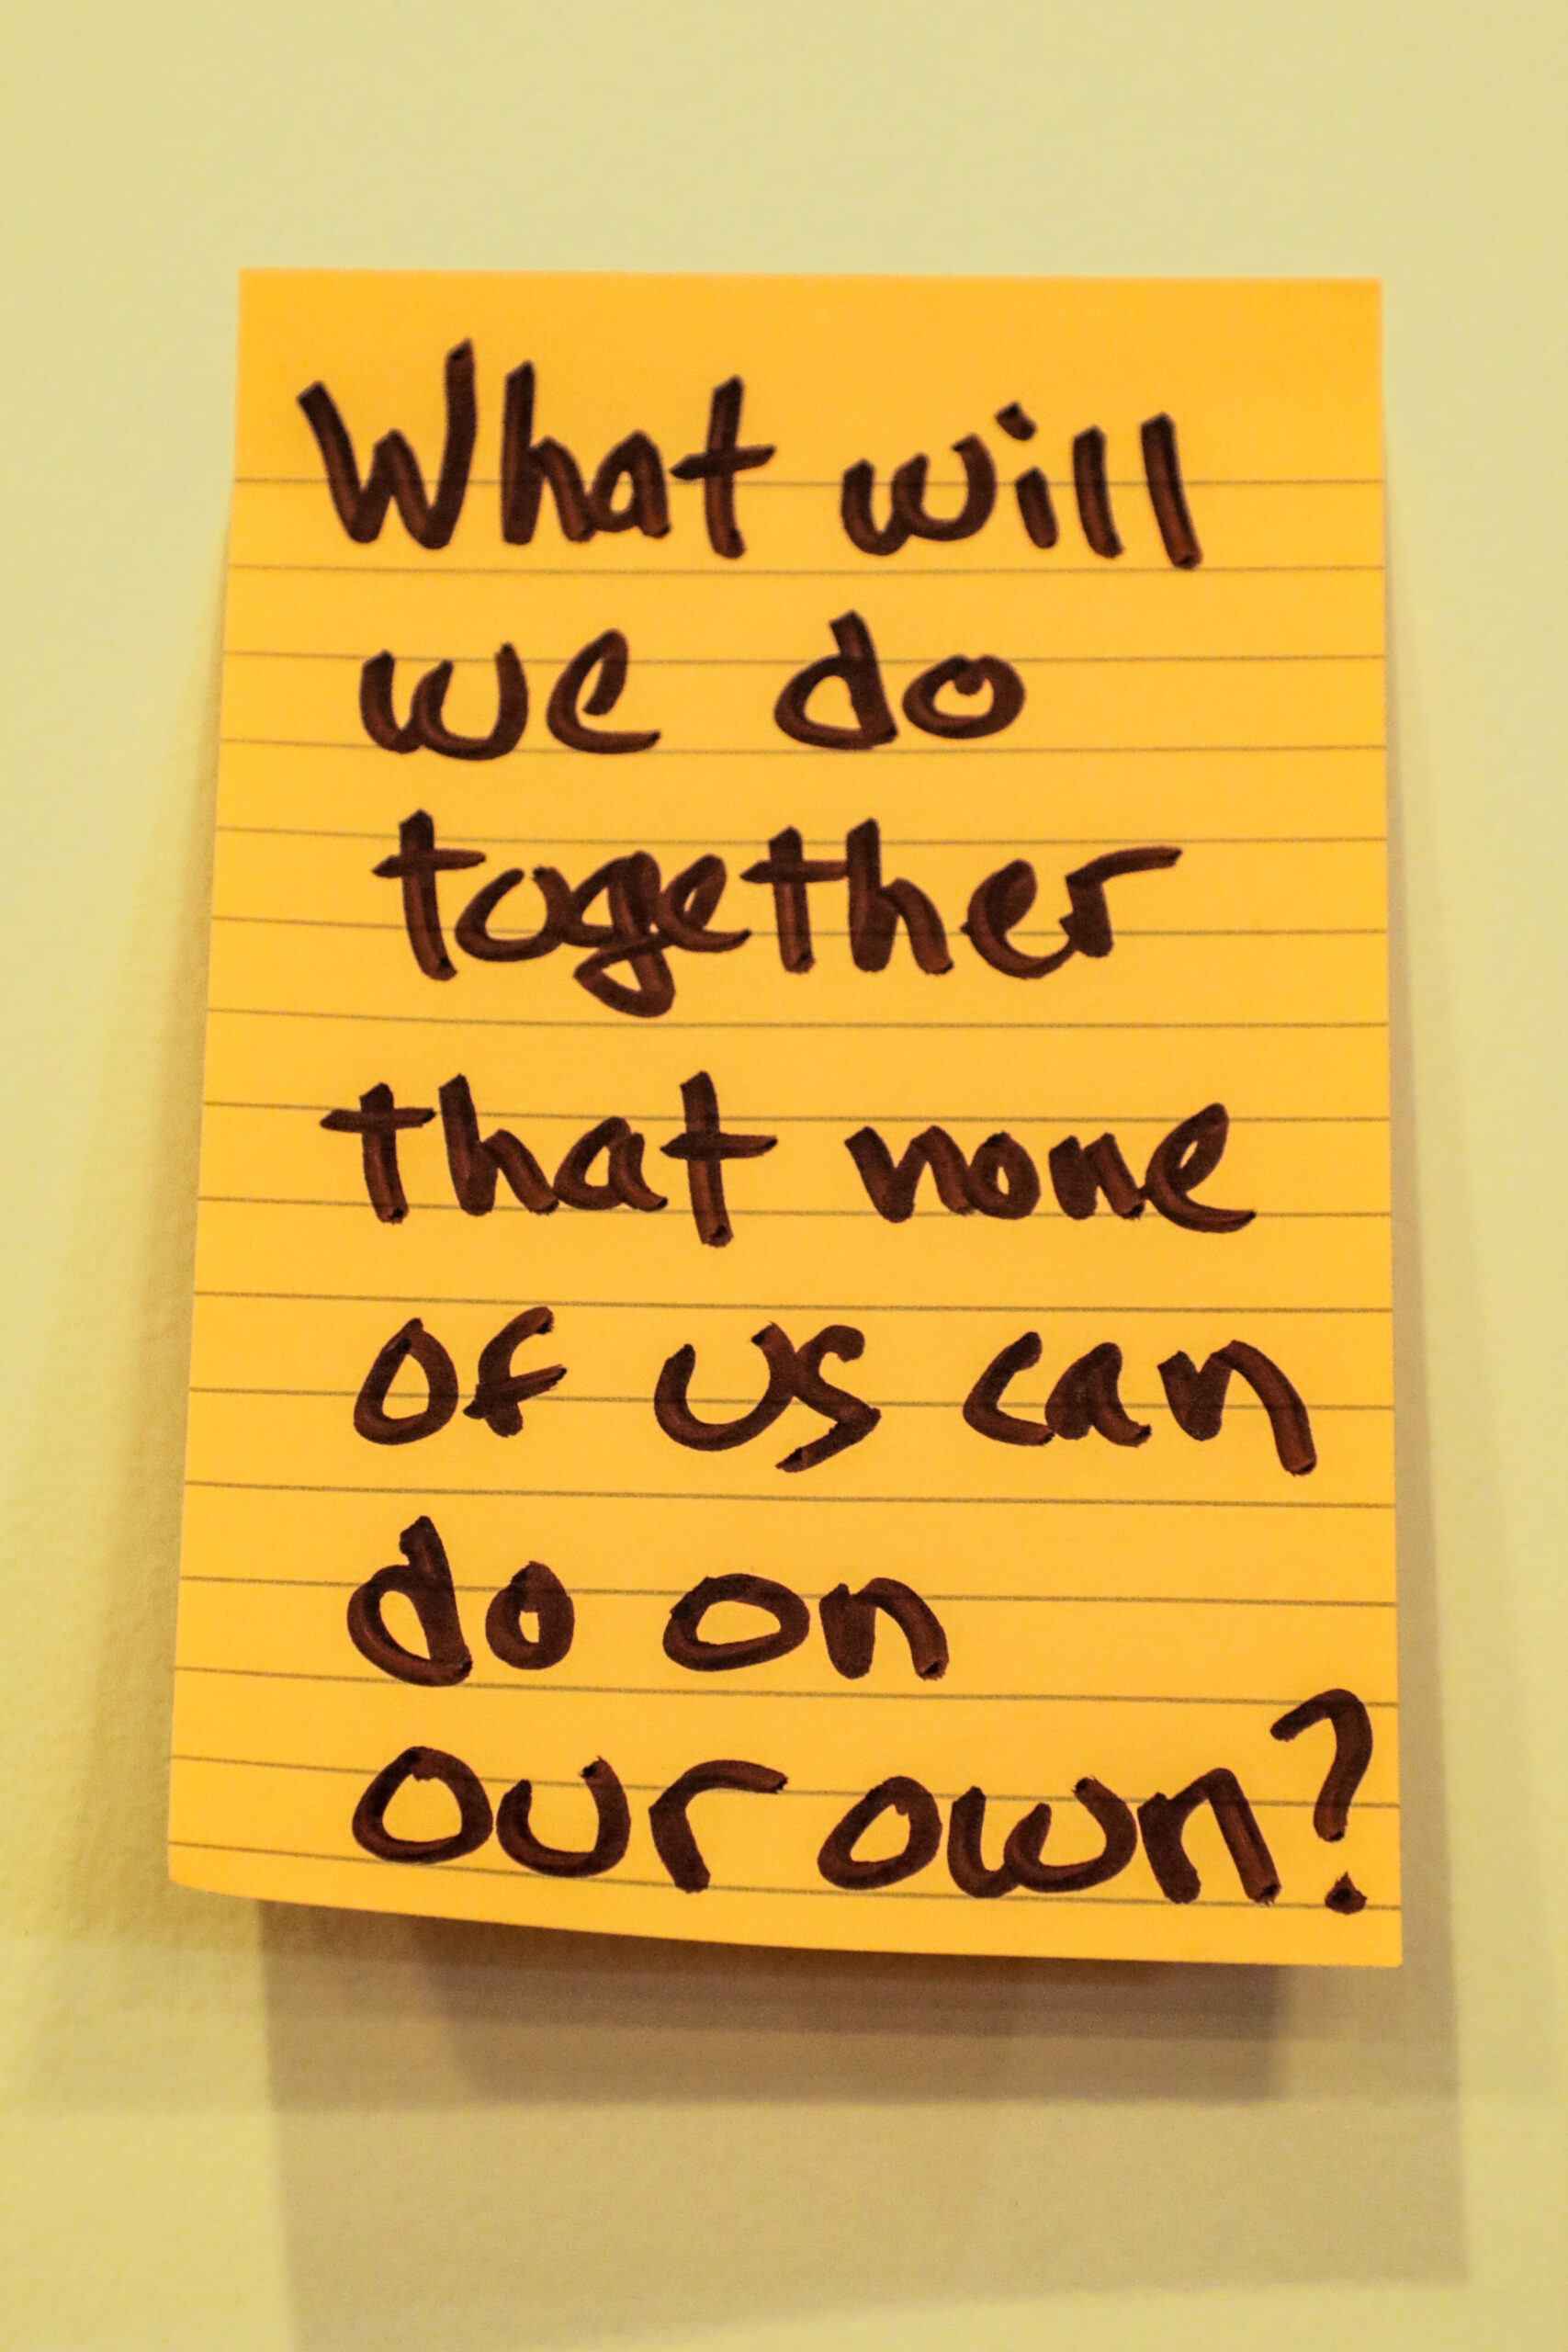 A little inspiration: "What will we do together tha none of us can do on our own?" - Rick Brush